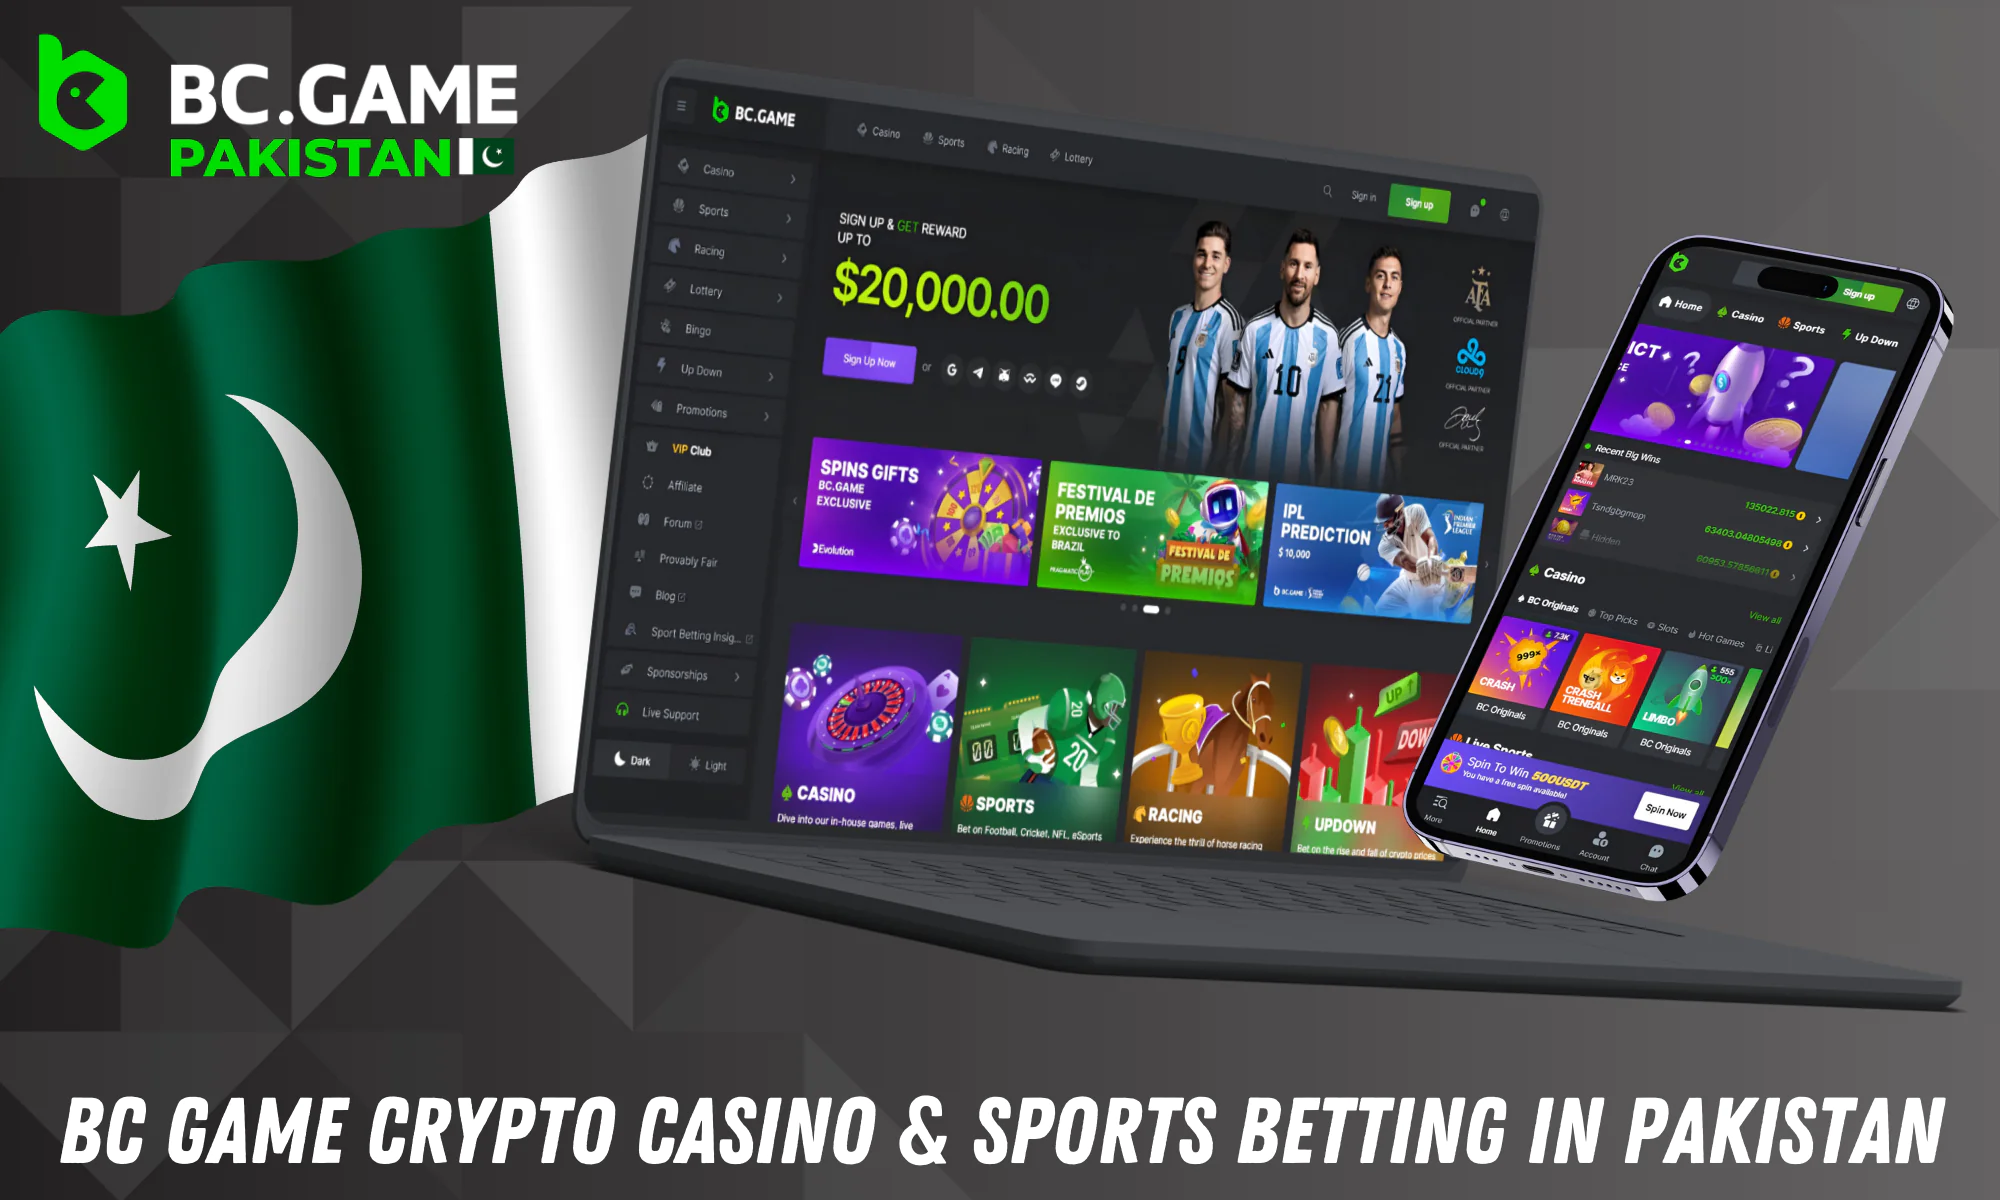 BC Game is a cryptocurrency casino website for players from Pakistan